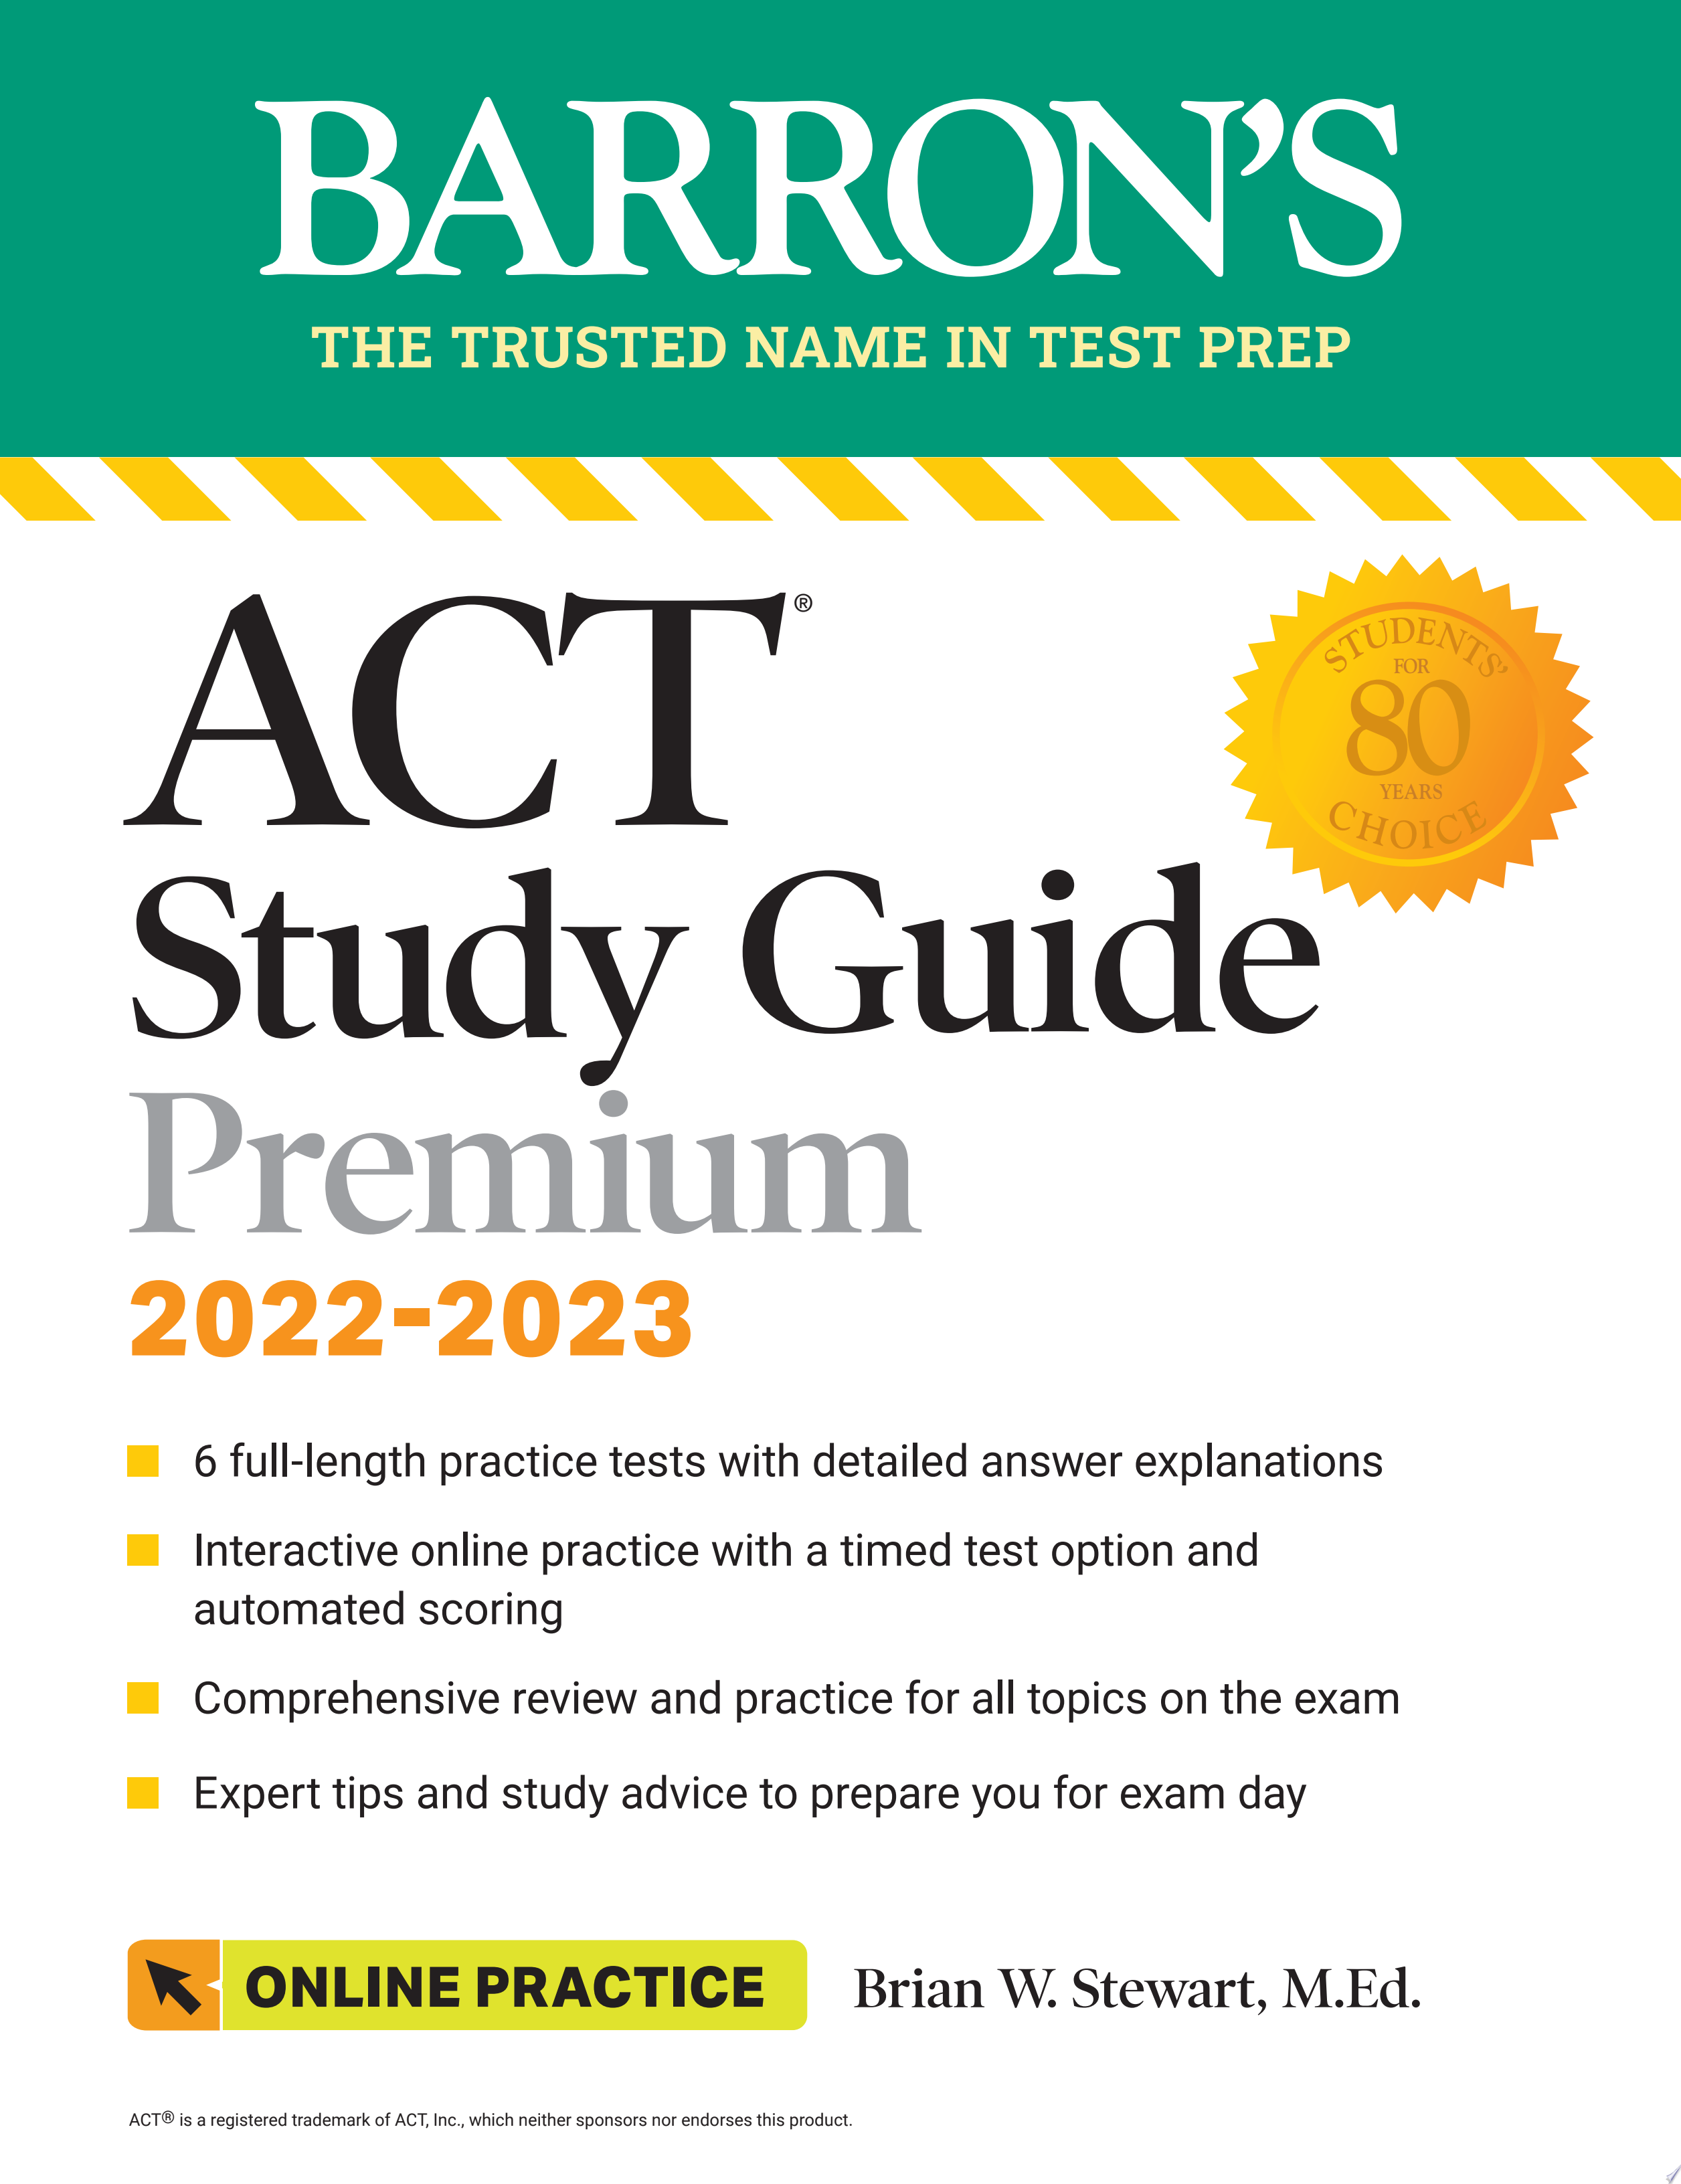 Image for "ACT Premium Study Guide"